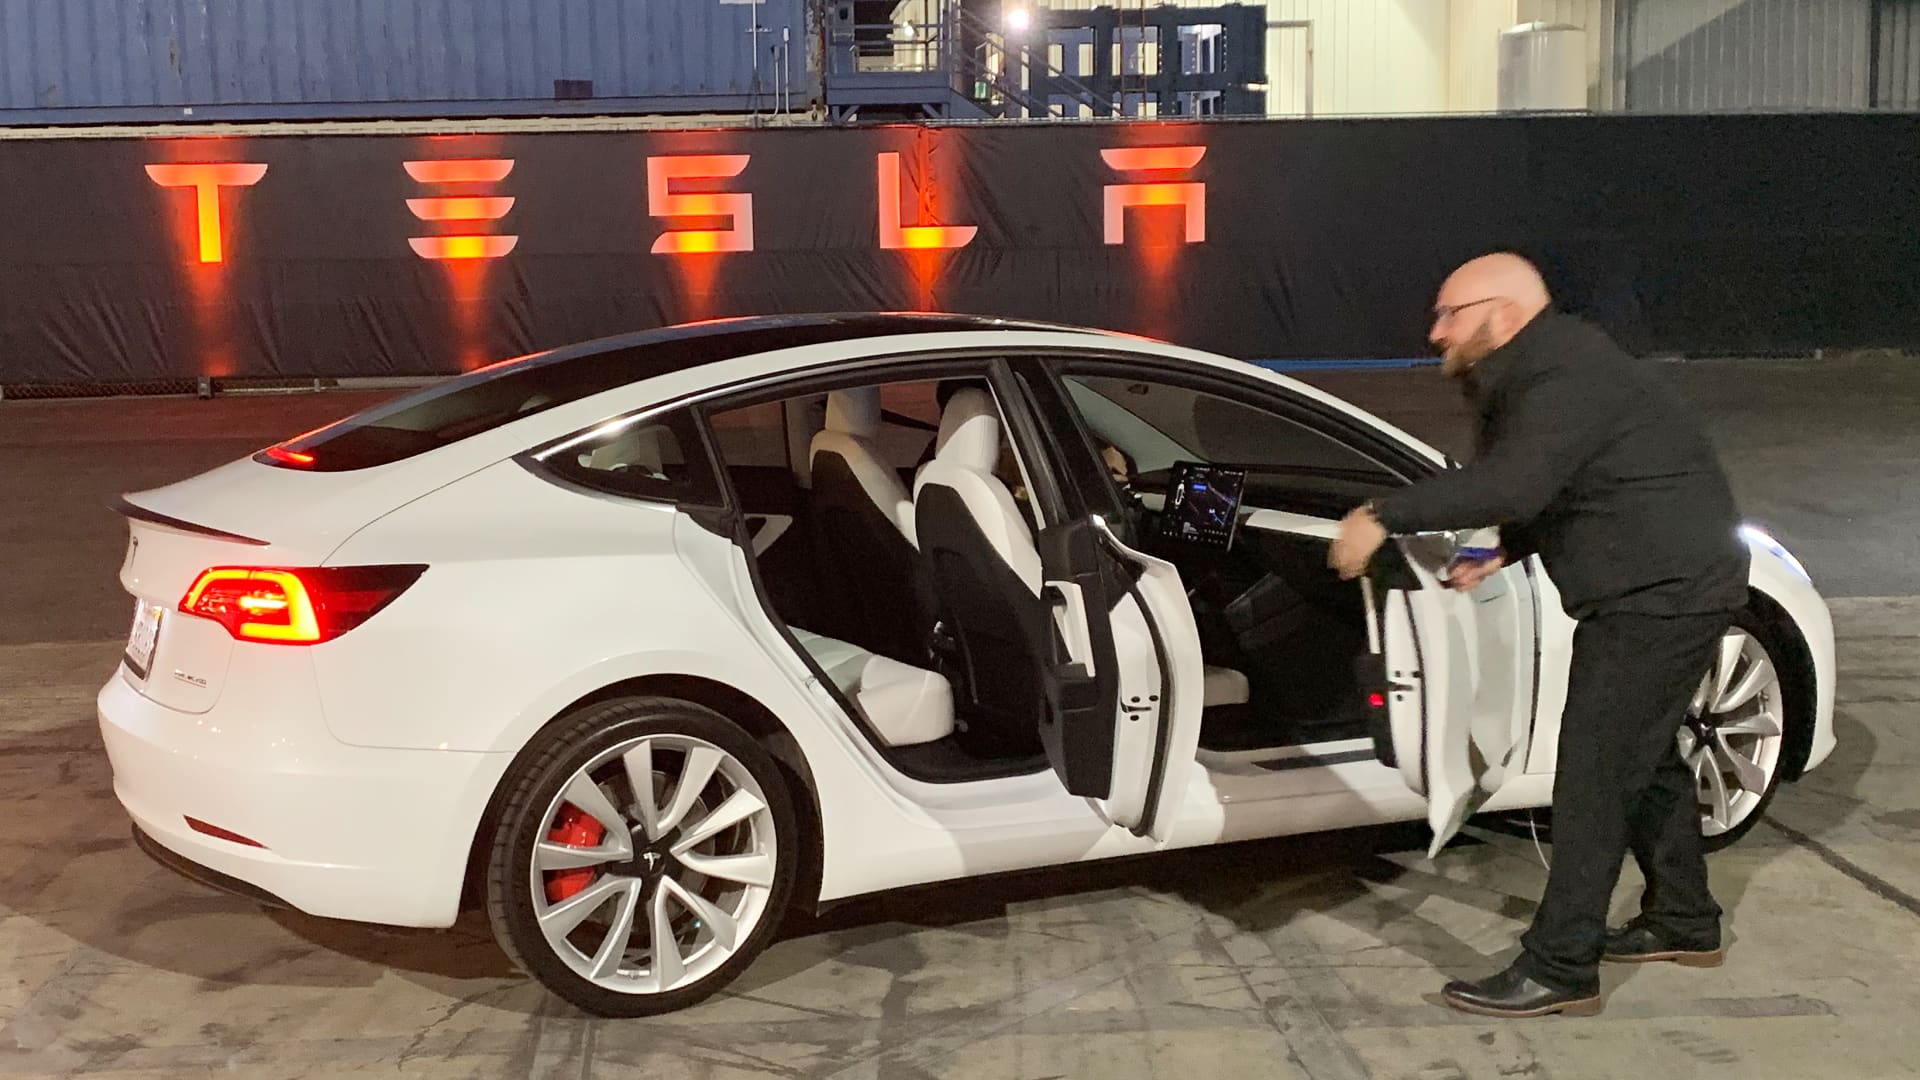 The new Tesla Model Y is introduced. Tesla has expanded its model range to include an SUV based on the current Model 3.